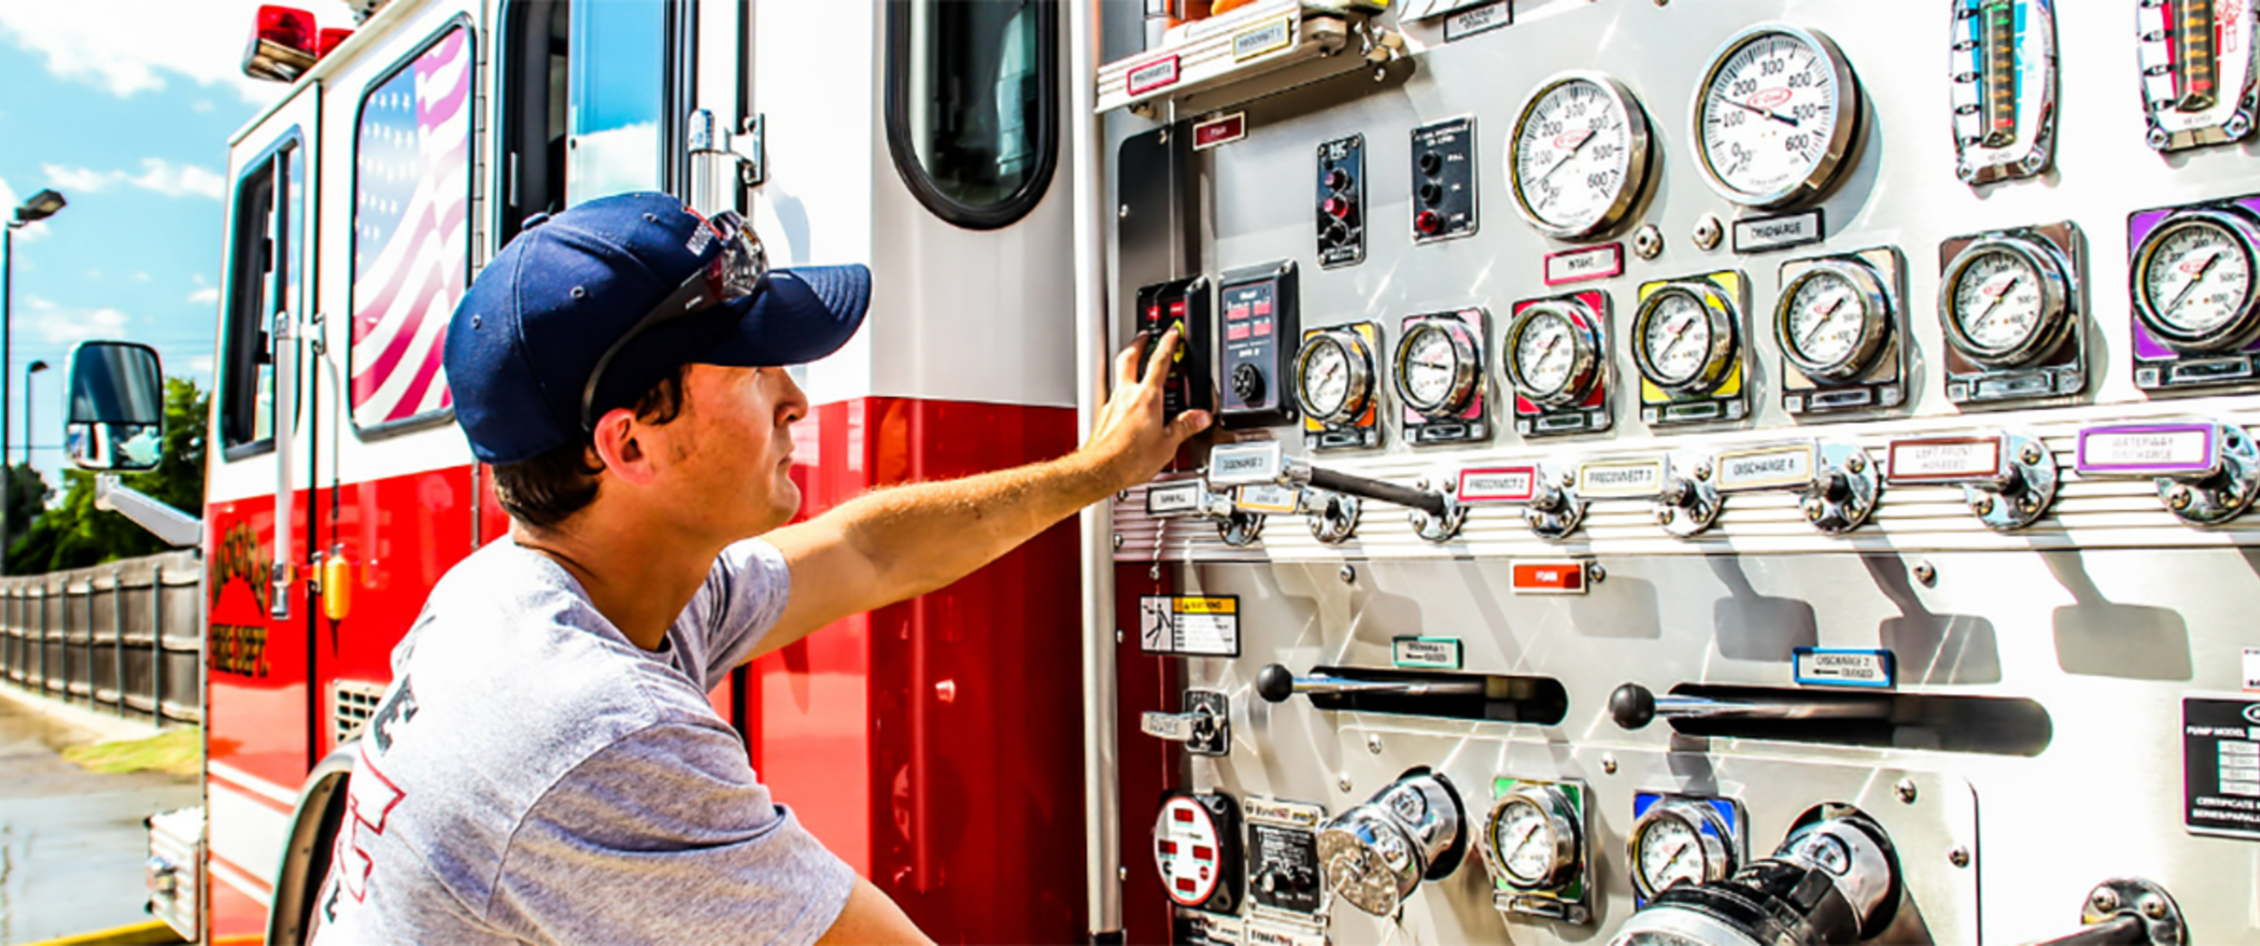 Fireman looking at gauges on fire truck.